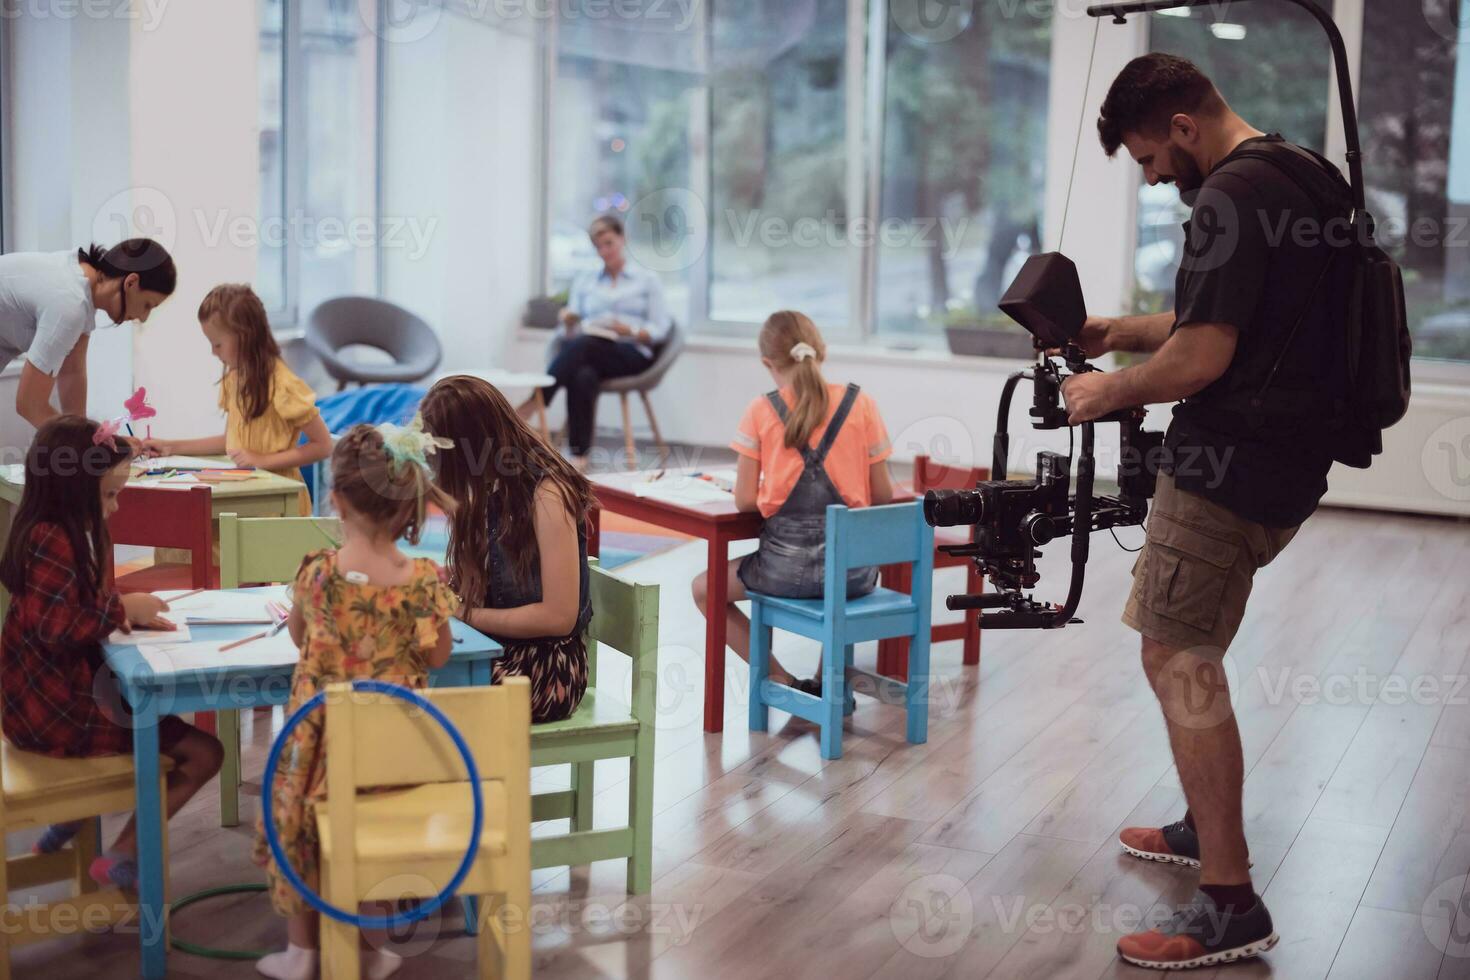 a videographer with a professional camera records children's socializing in a preschool institution photo